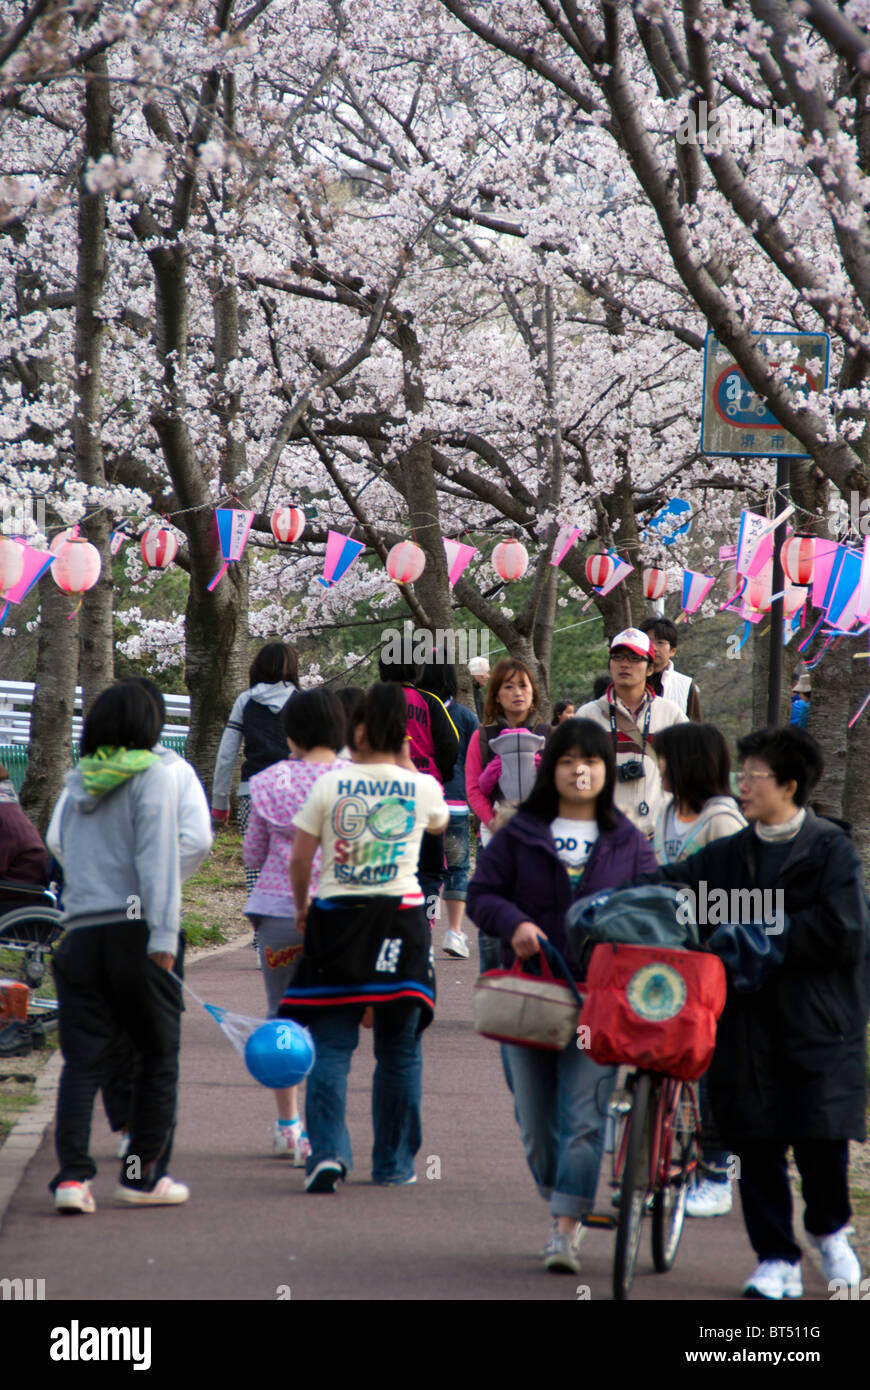 A crowd of people enjoying a cherry blossom festival (hanami) in Japan Stock Photo